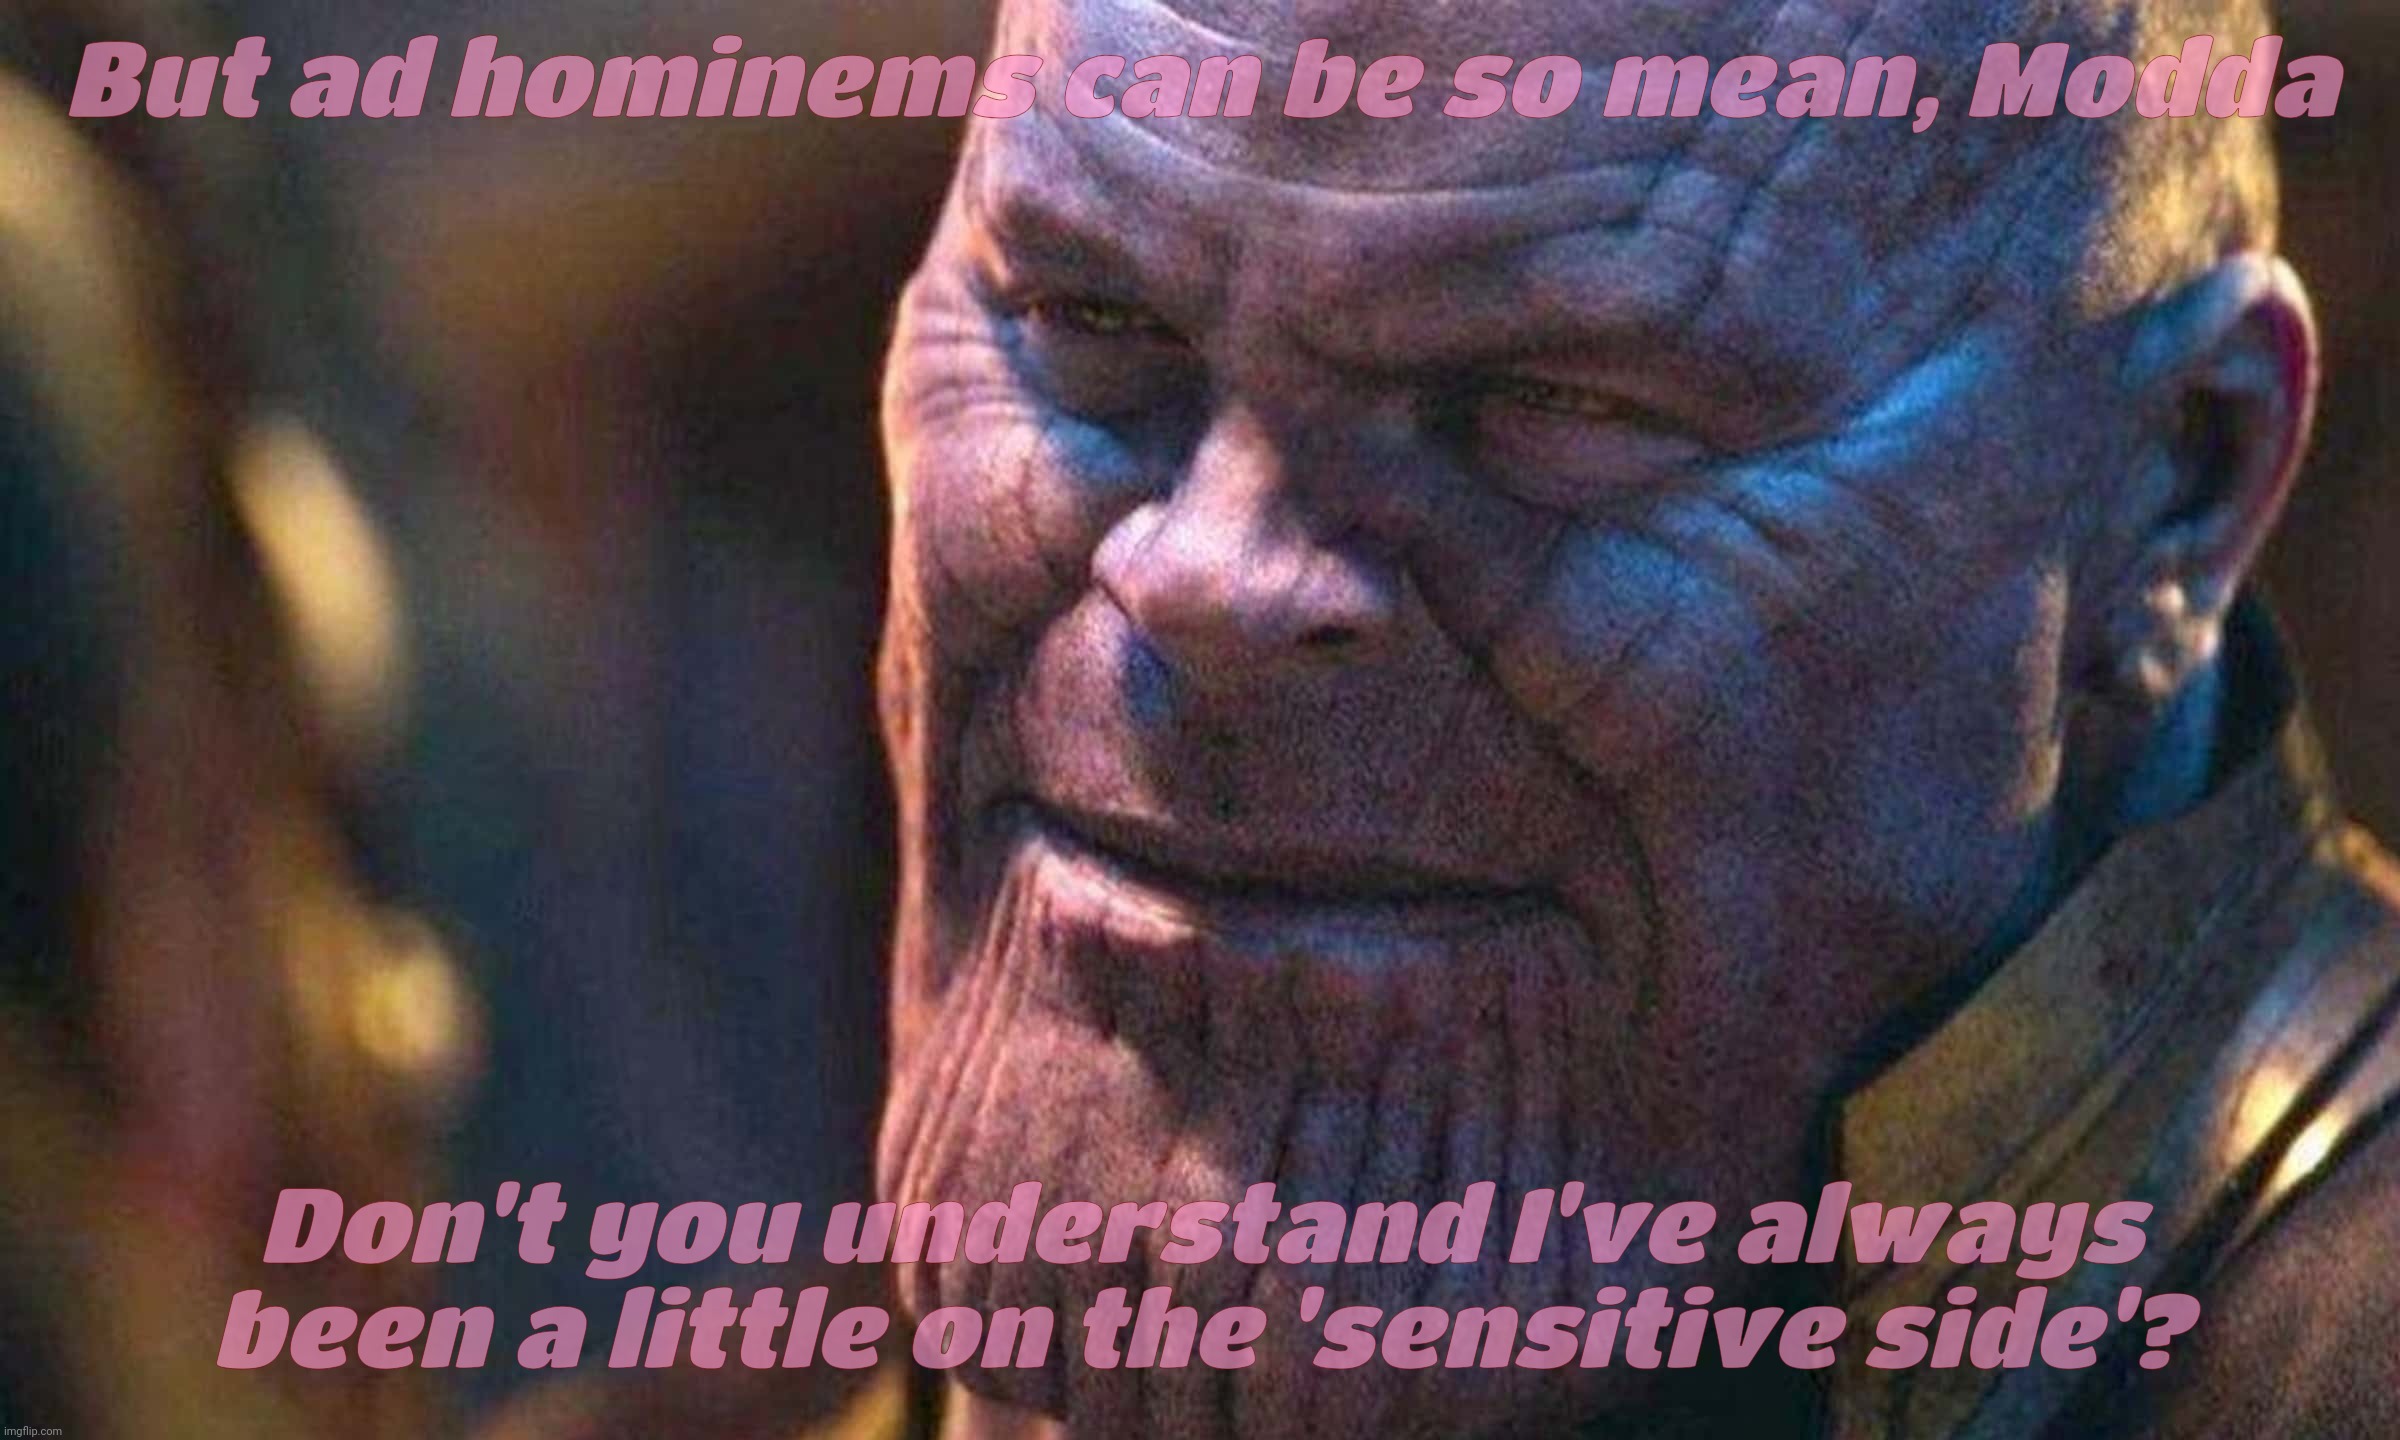 Sad Titan accused me of ad homineming his delicate hind quarters. Such tragedy that I can be so mean to the self strangling Emo. | But ad hominems can be so mean, Modda; Don't you understand I've always been a little on the 'sensitive side'? | image tagged in thanos,sad titan,ad hominems,such cruelty,so emo,it's all about the feelz | made w/ Imgflip meme maker